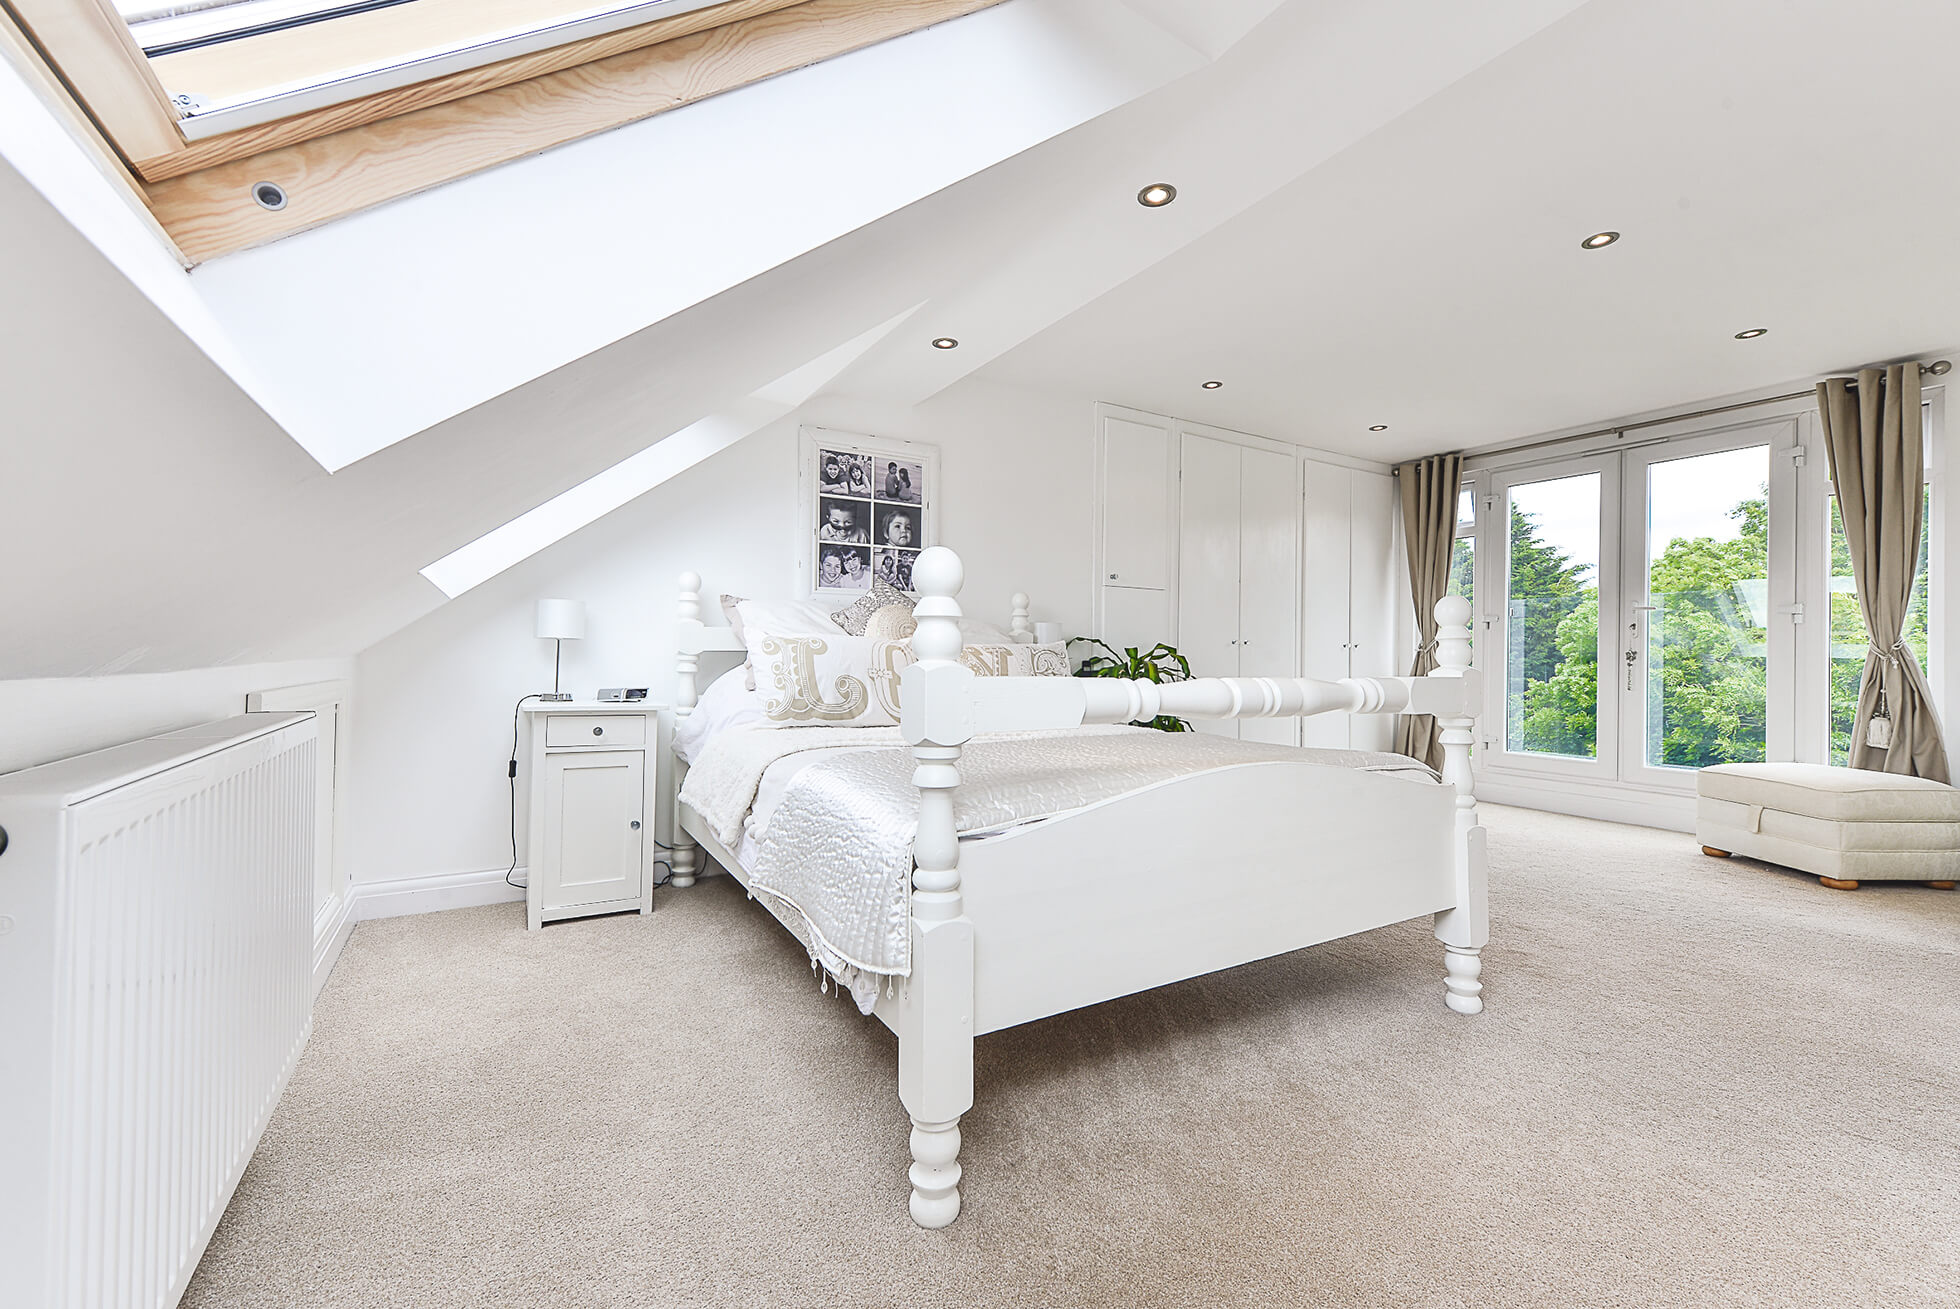 Do you have a question about converting your Loft in Great Munden? Here are the most popular questions asked by our clients.